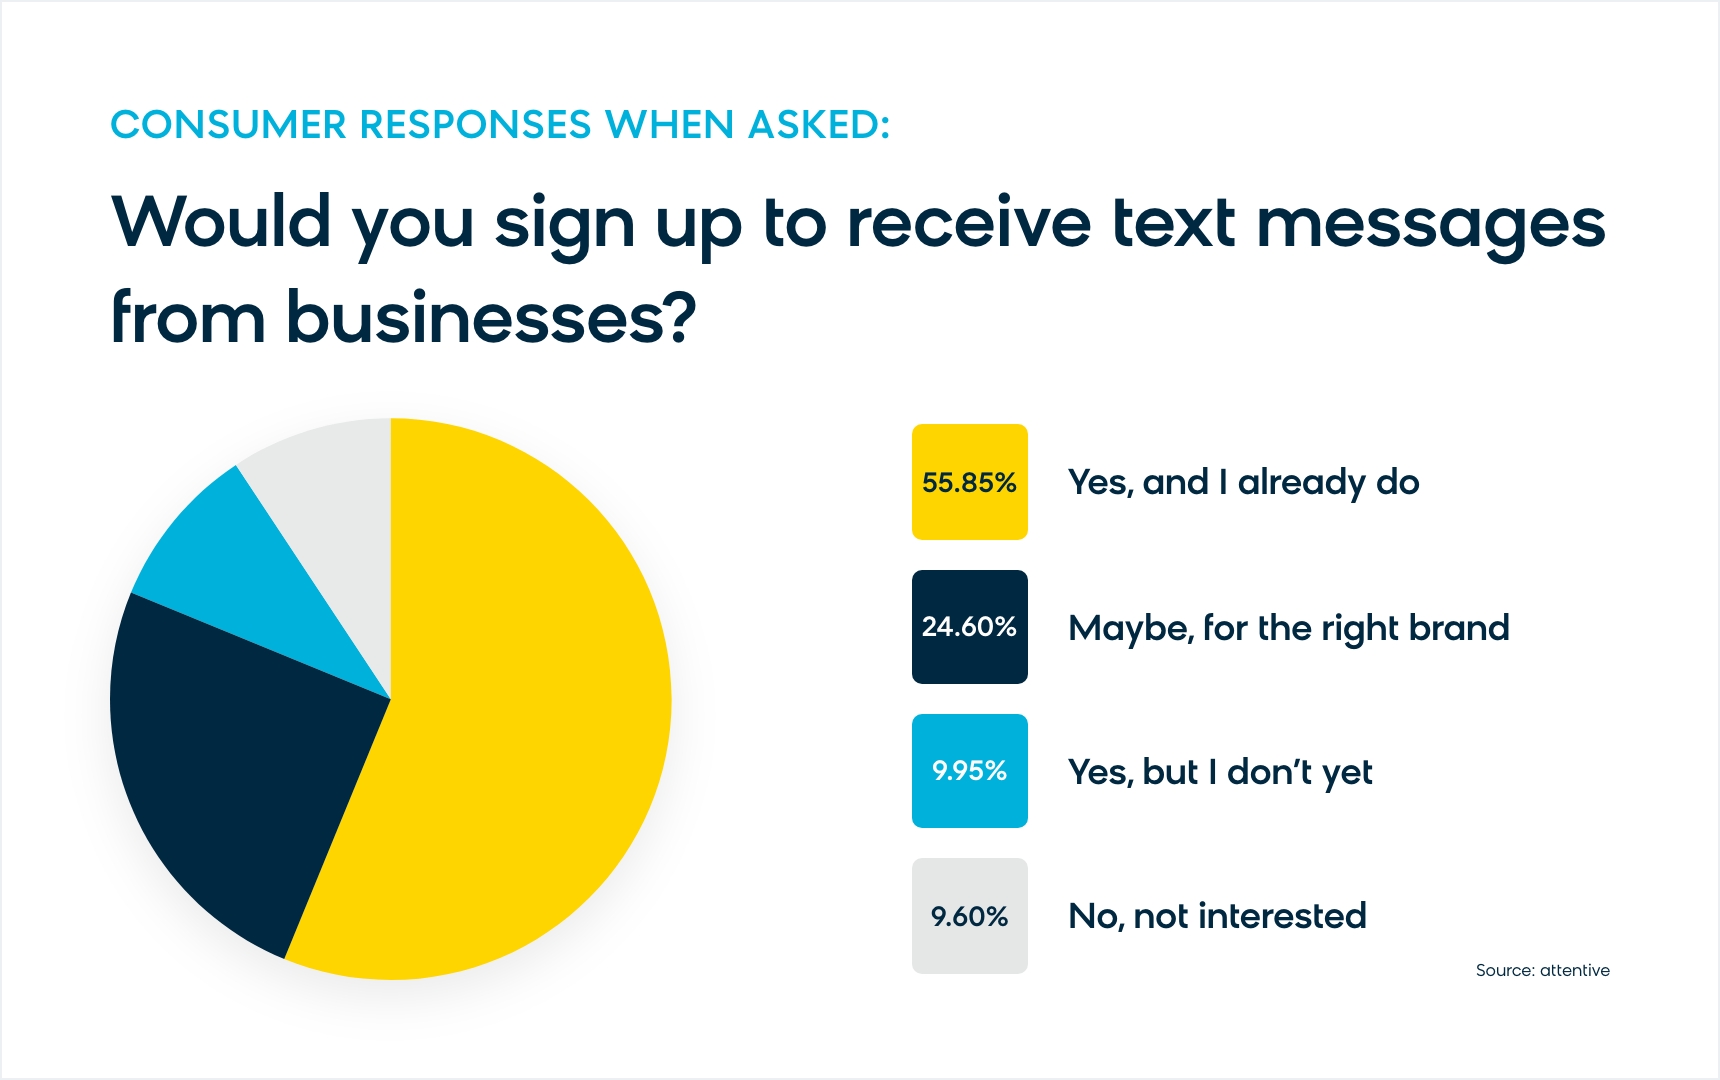 An overwhelming 91% of consumers are interested in signing up for texts from businesses.